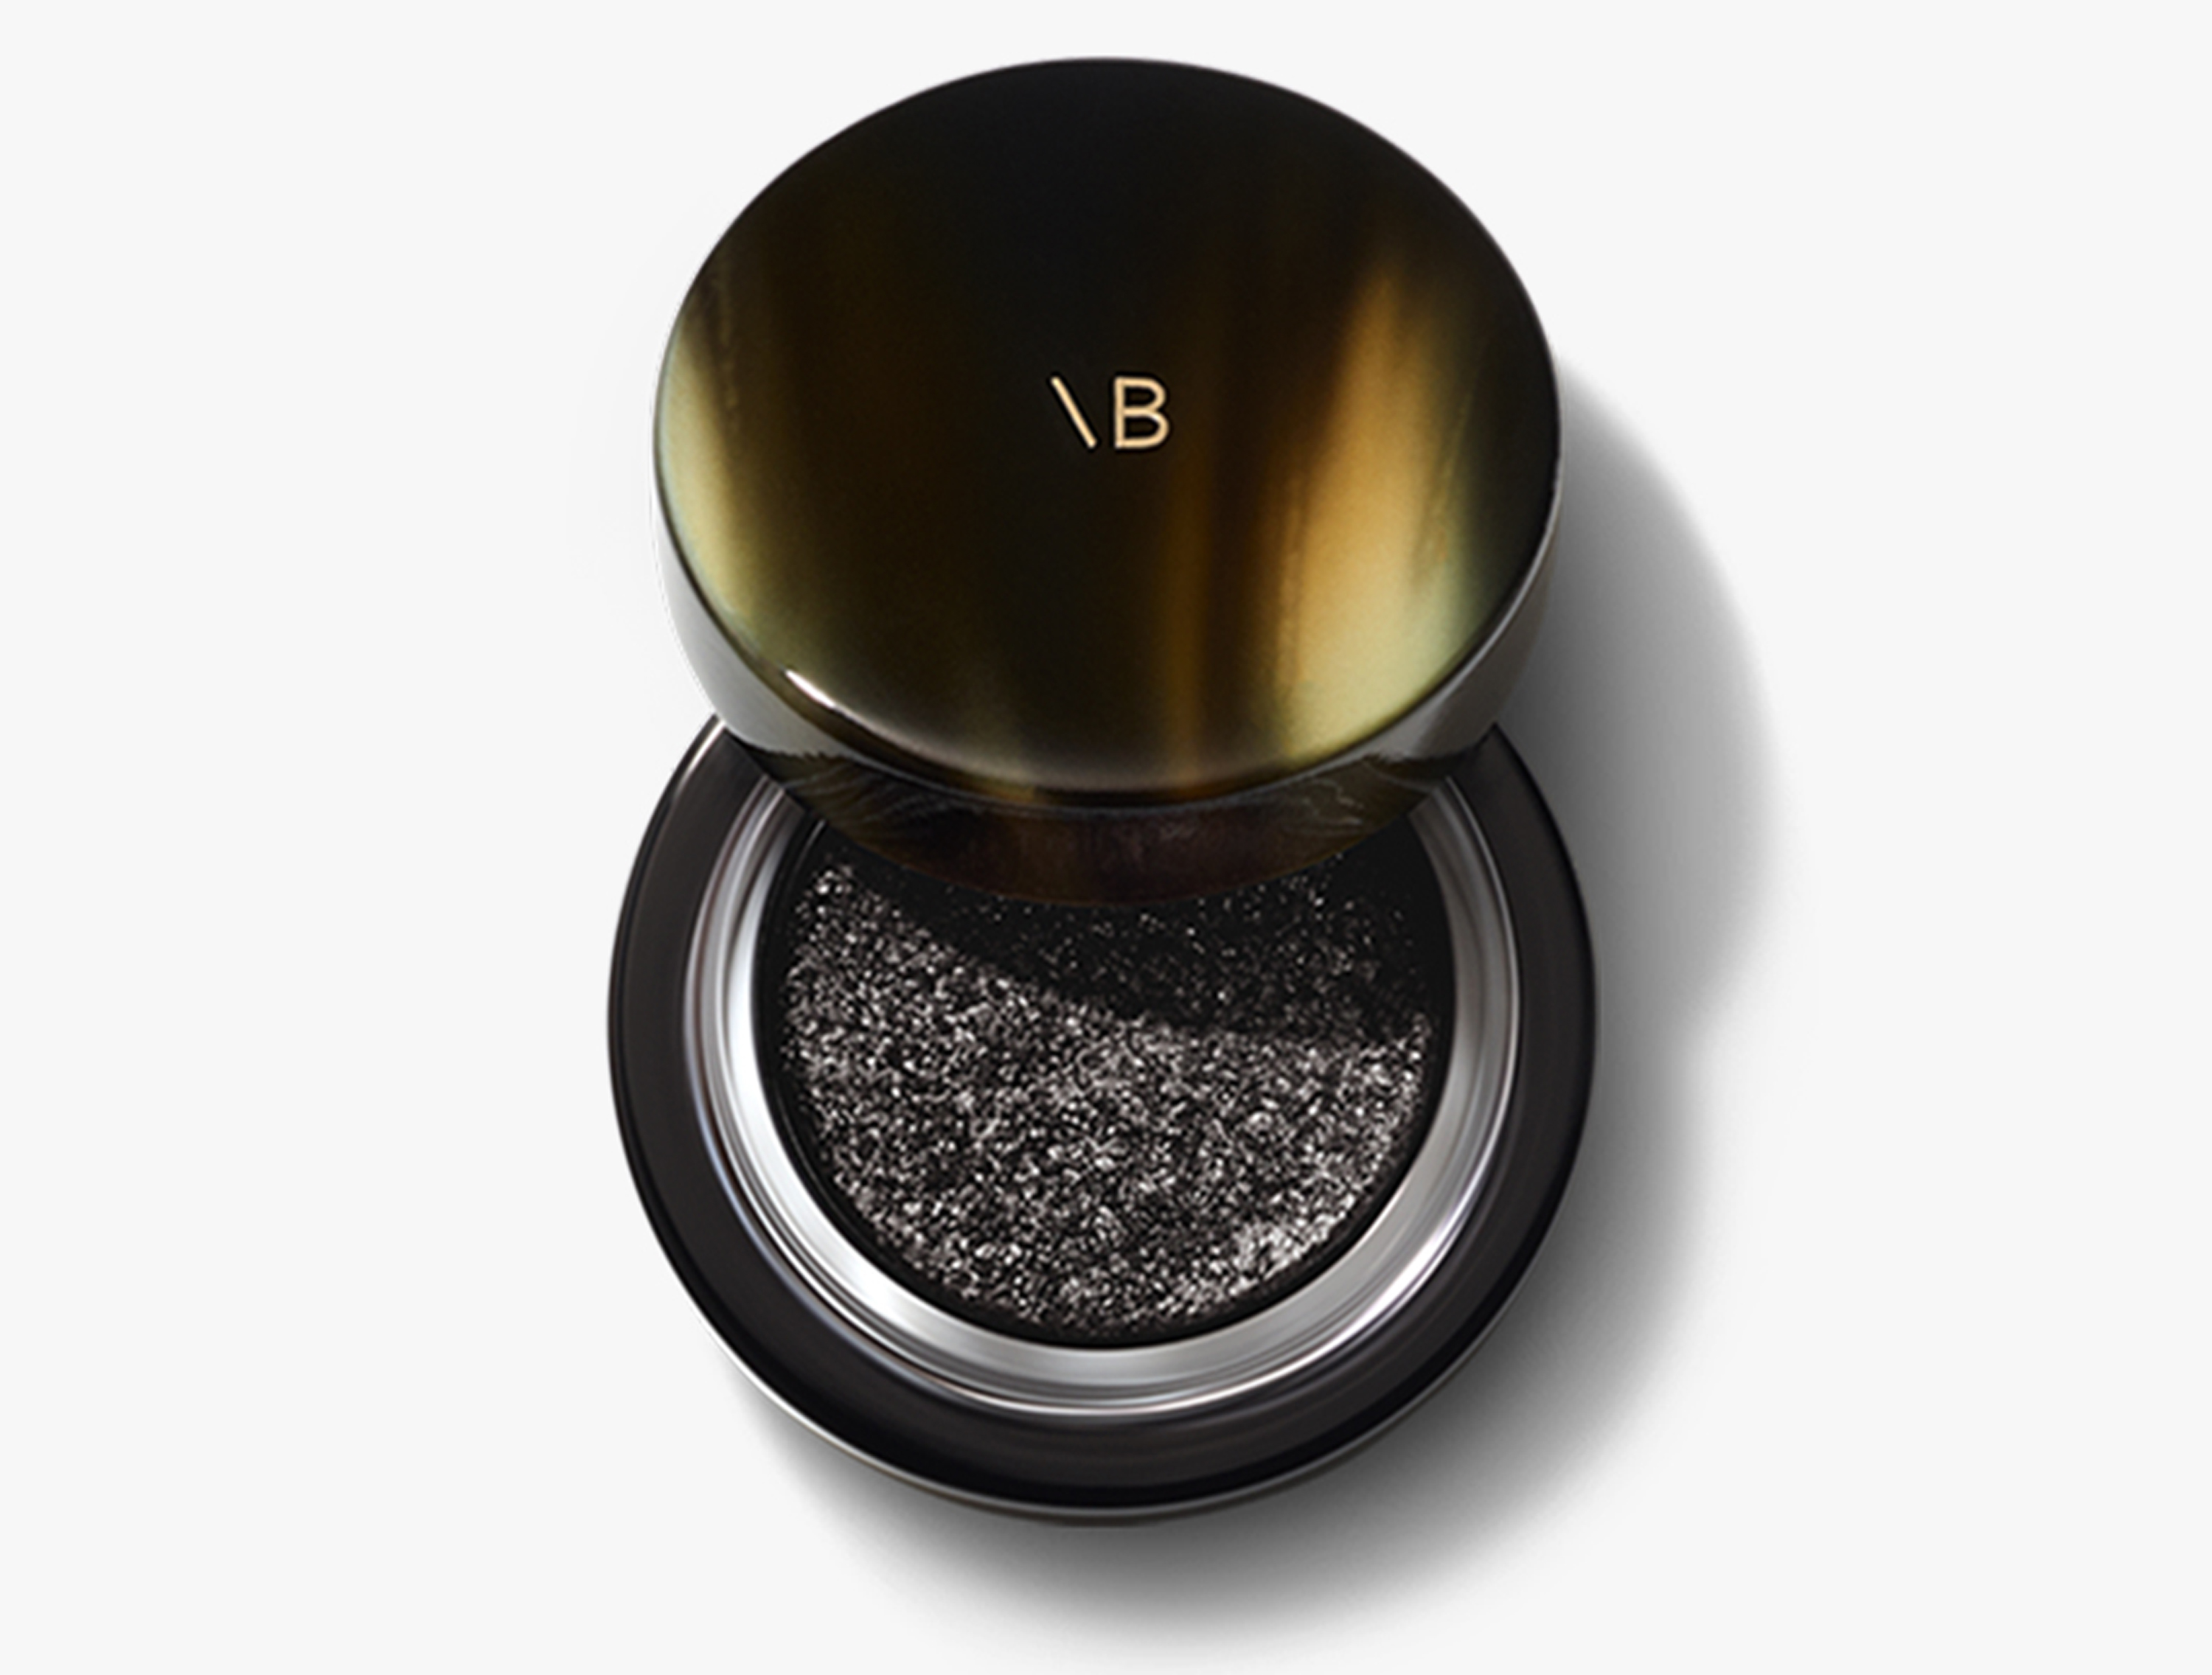 Victoria Beckham Beauty Lid Lustre in Onyx